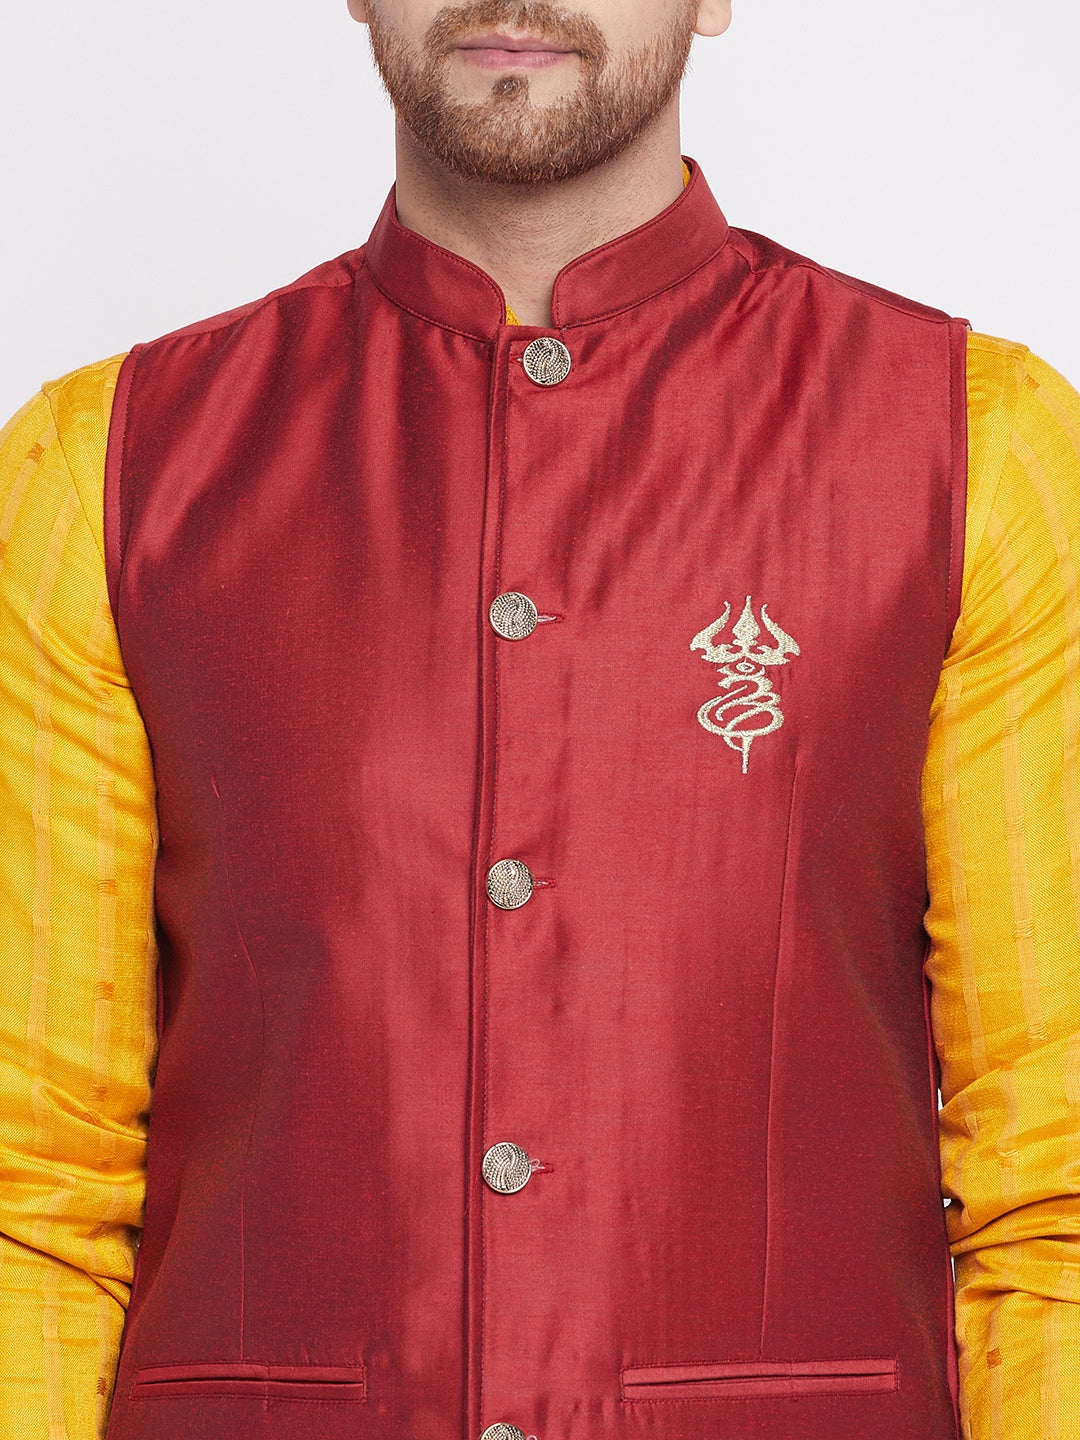 Men's Nehru Jacket With Embroided Insignia Of Lord Shiv -Even Apparels